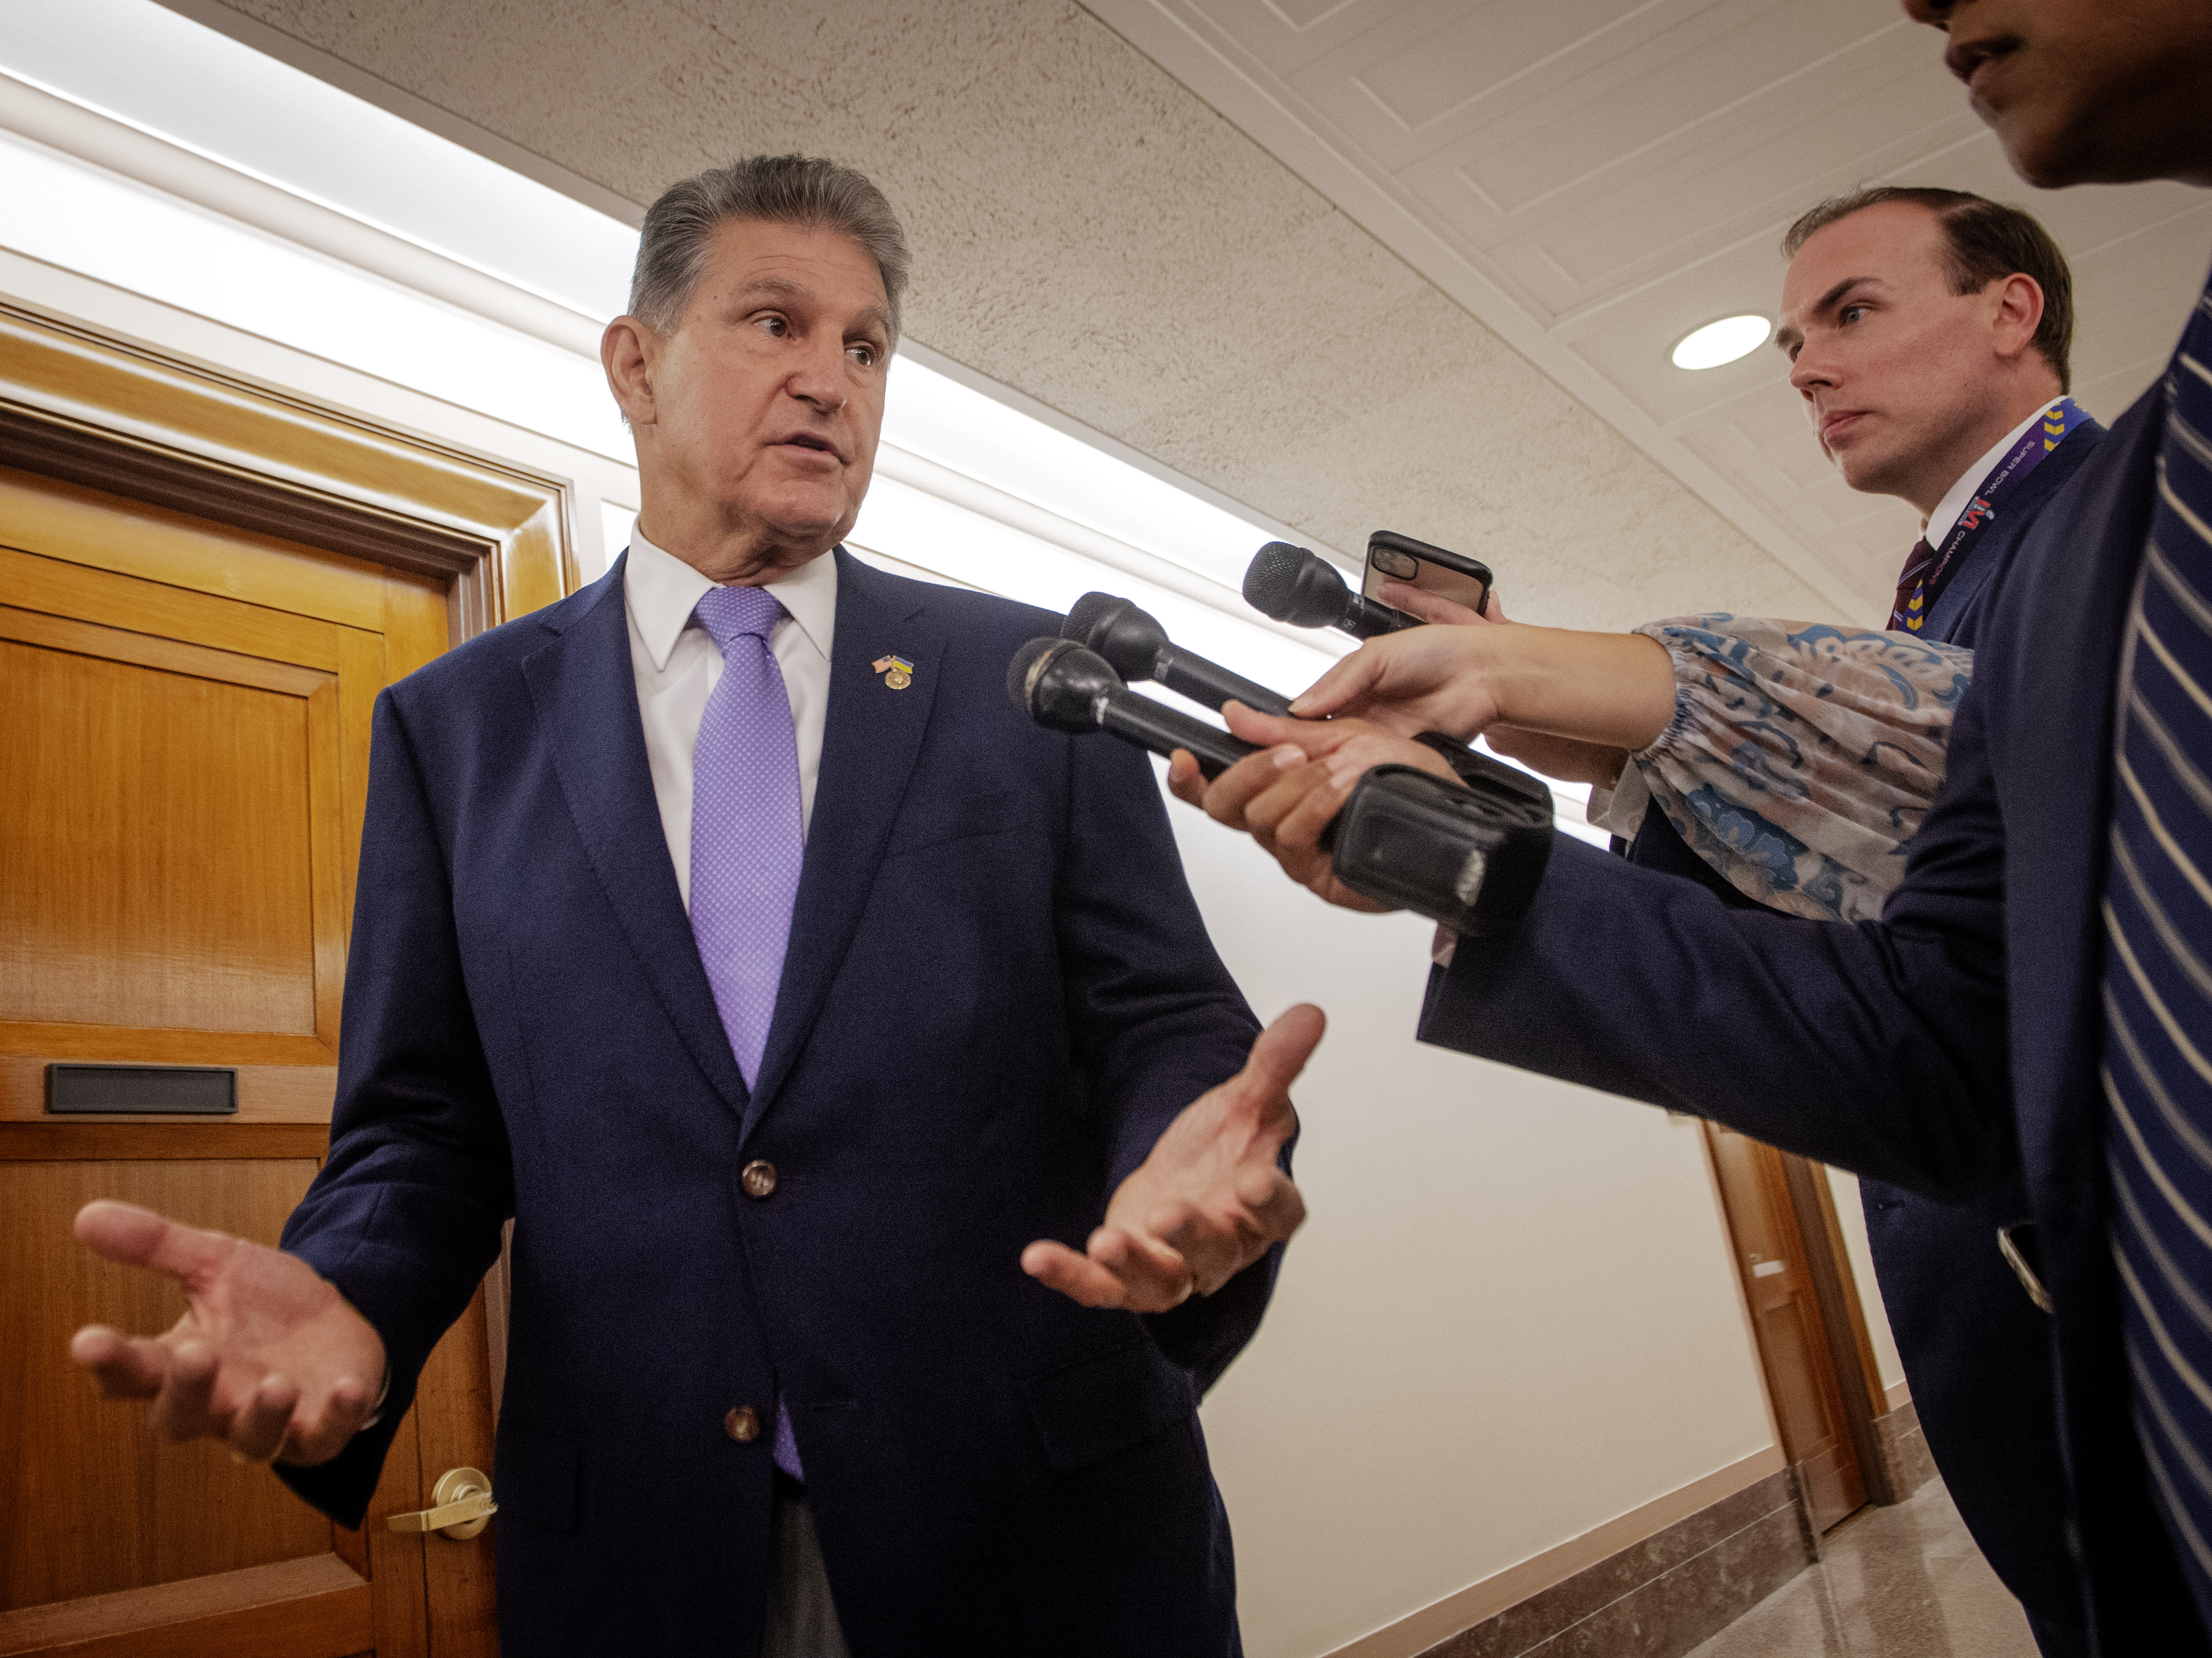 Sen. Joe Manchin stands outside a Energy and Natural Resources committee hearing earlier this month